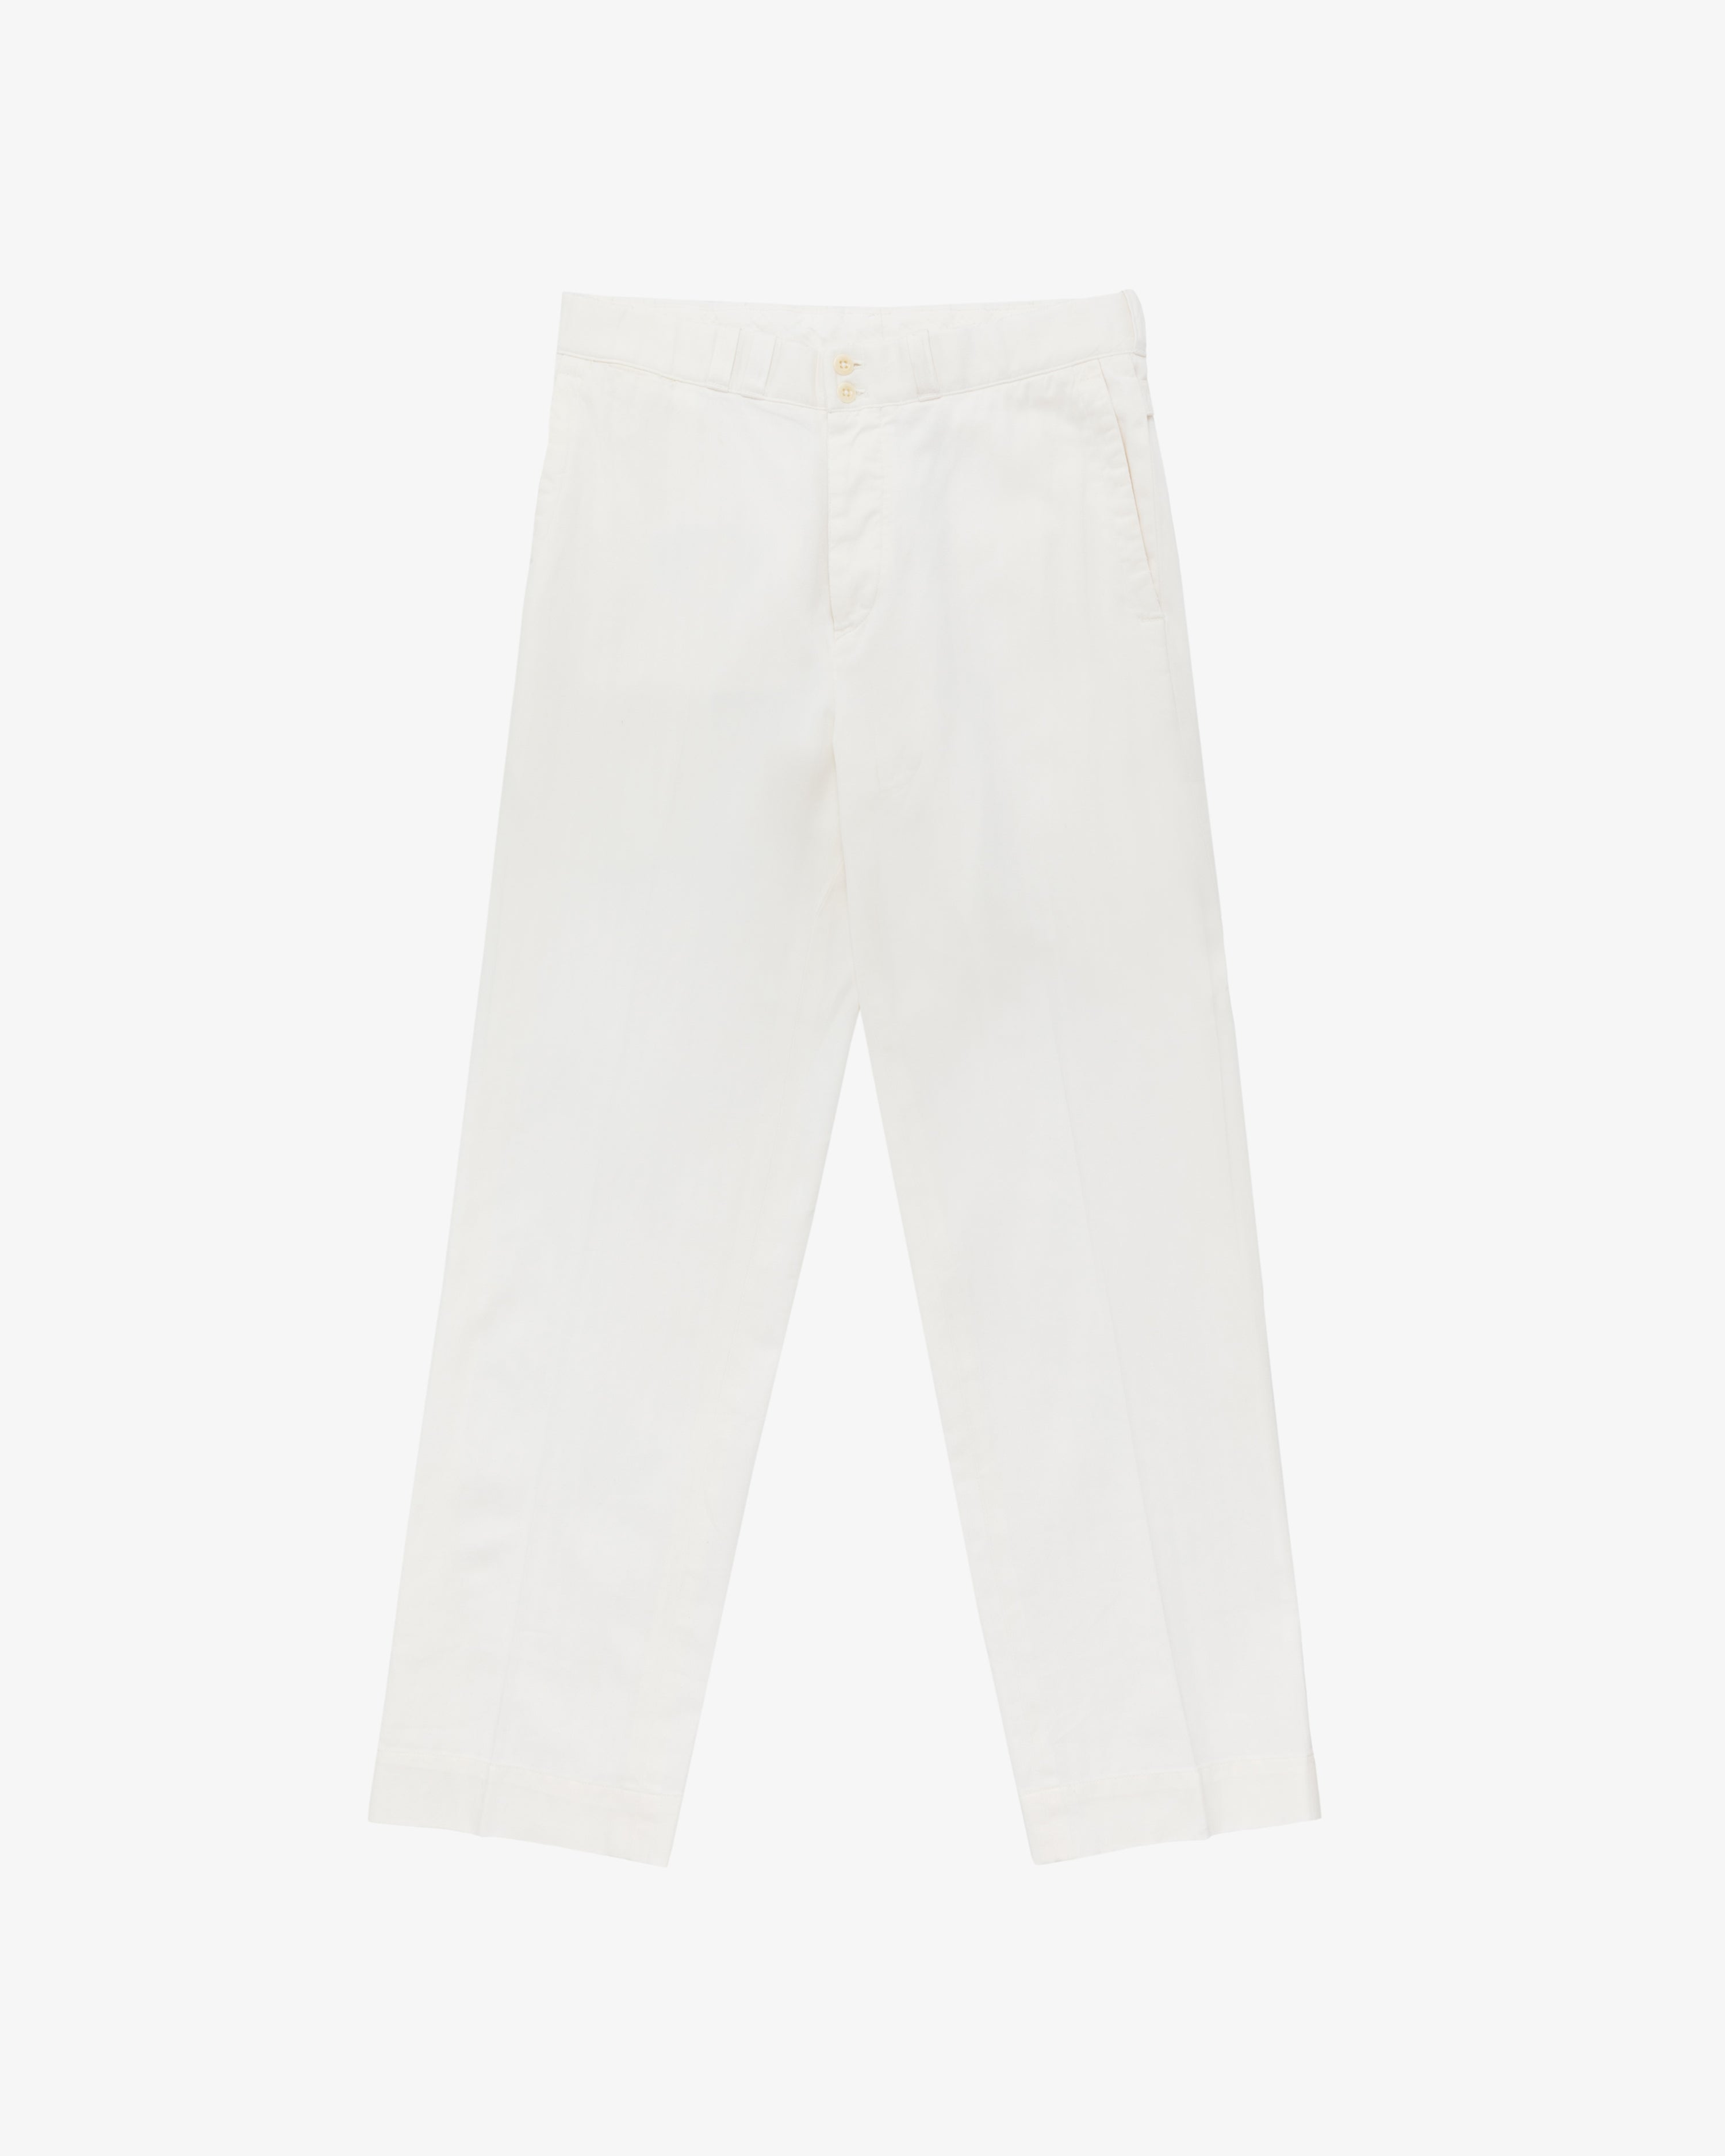 Vintage Polo by Ralph Lauren Trousers